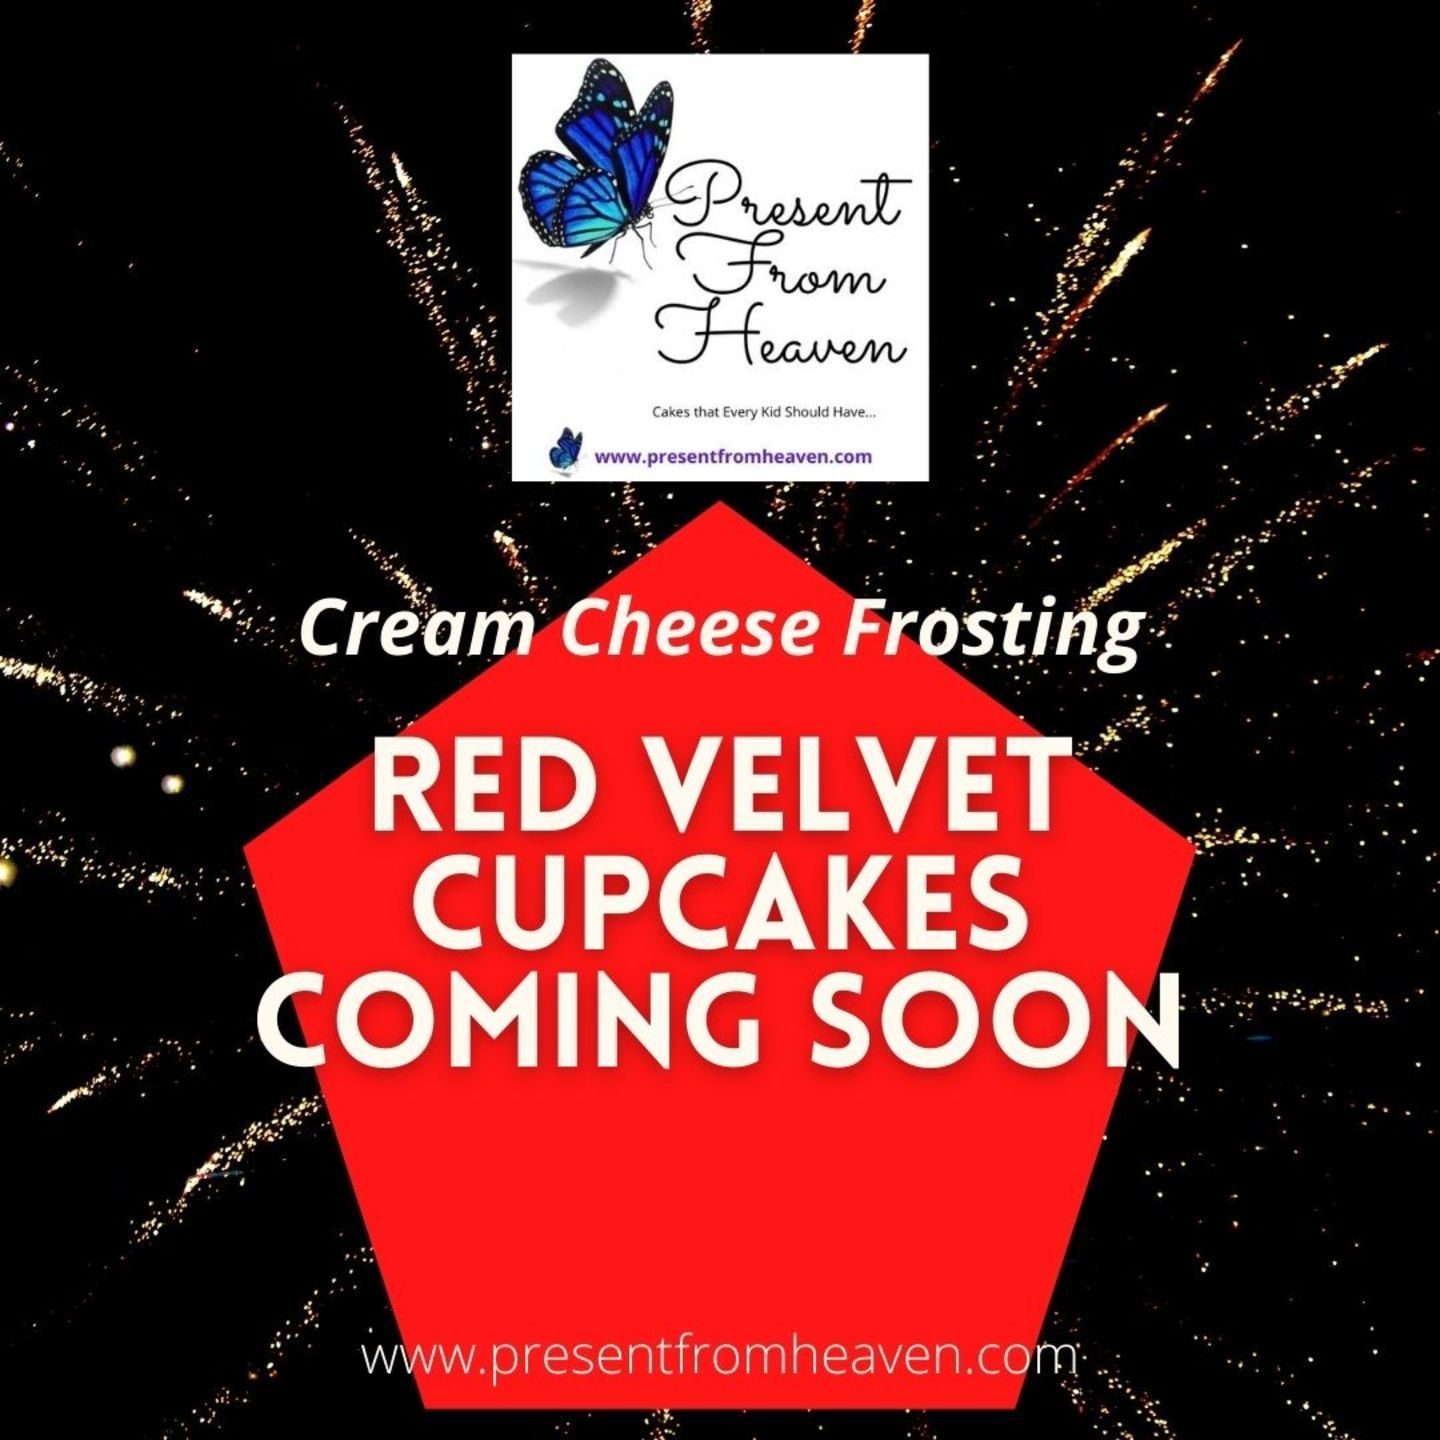 Red Velvet Cupcakes with Cream Cheese Frosting - coming soon